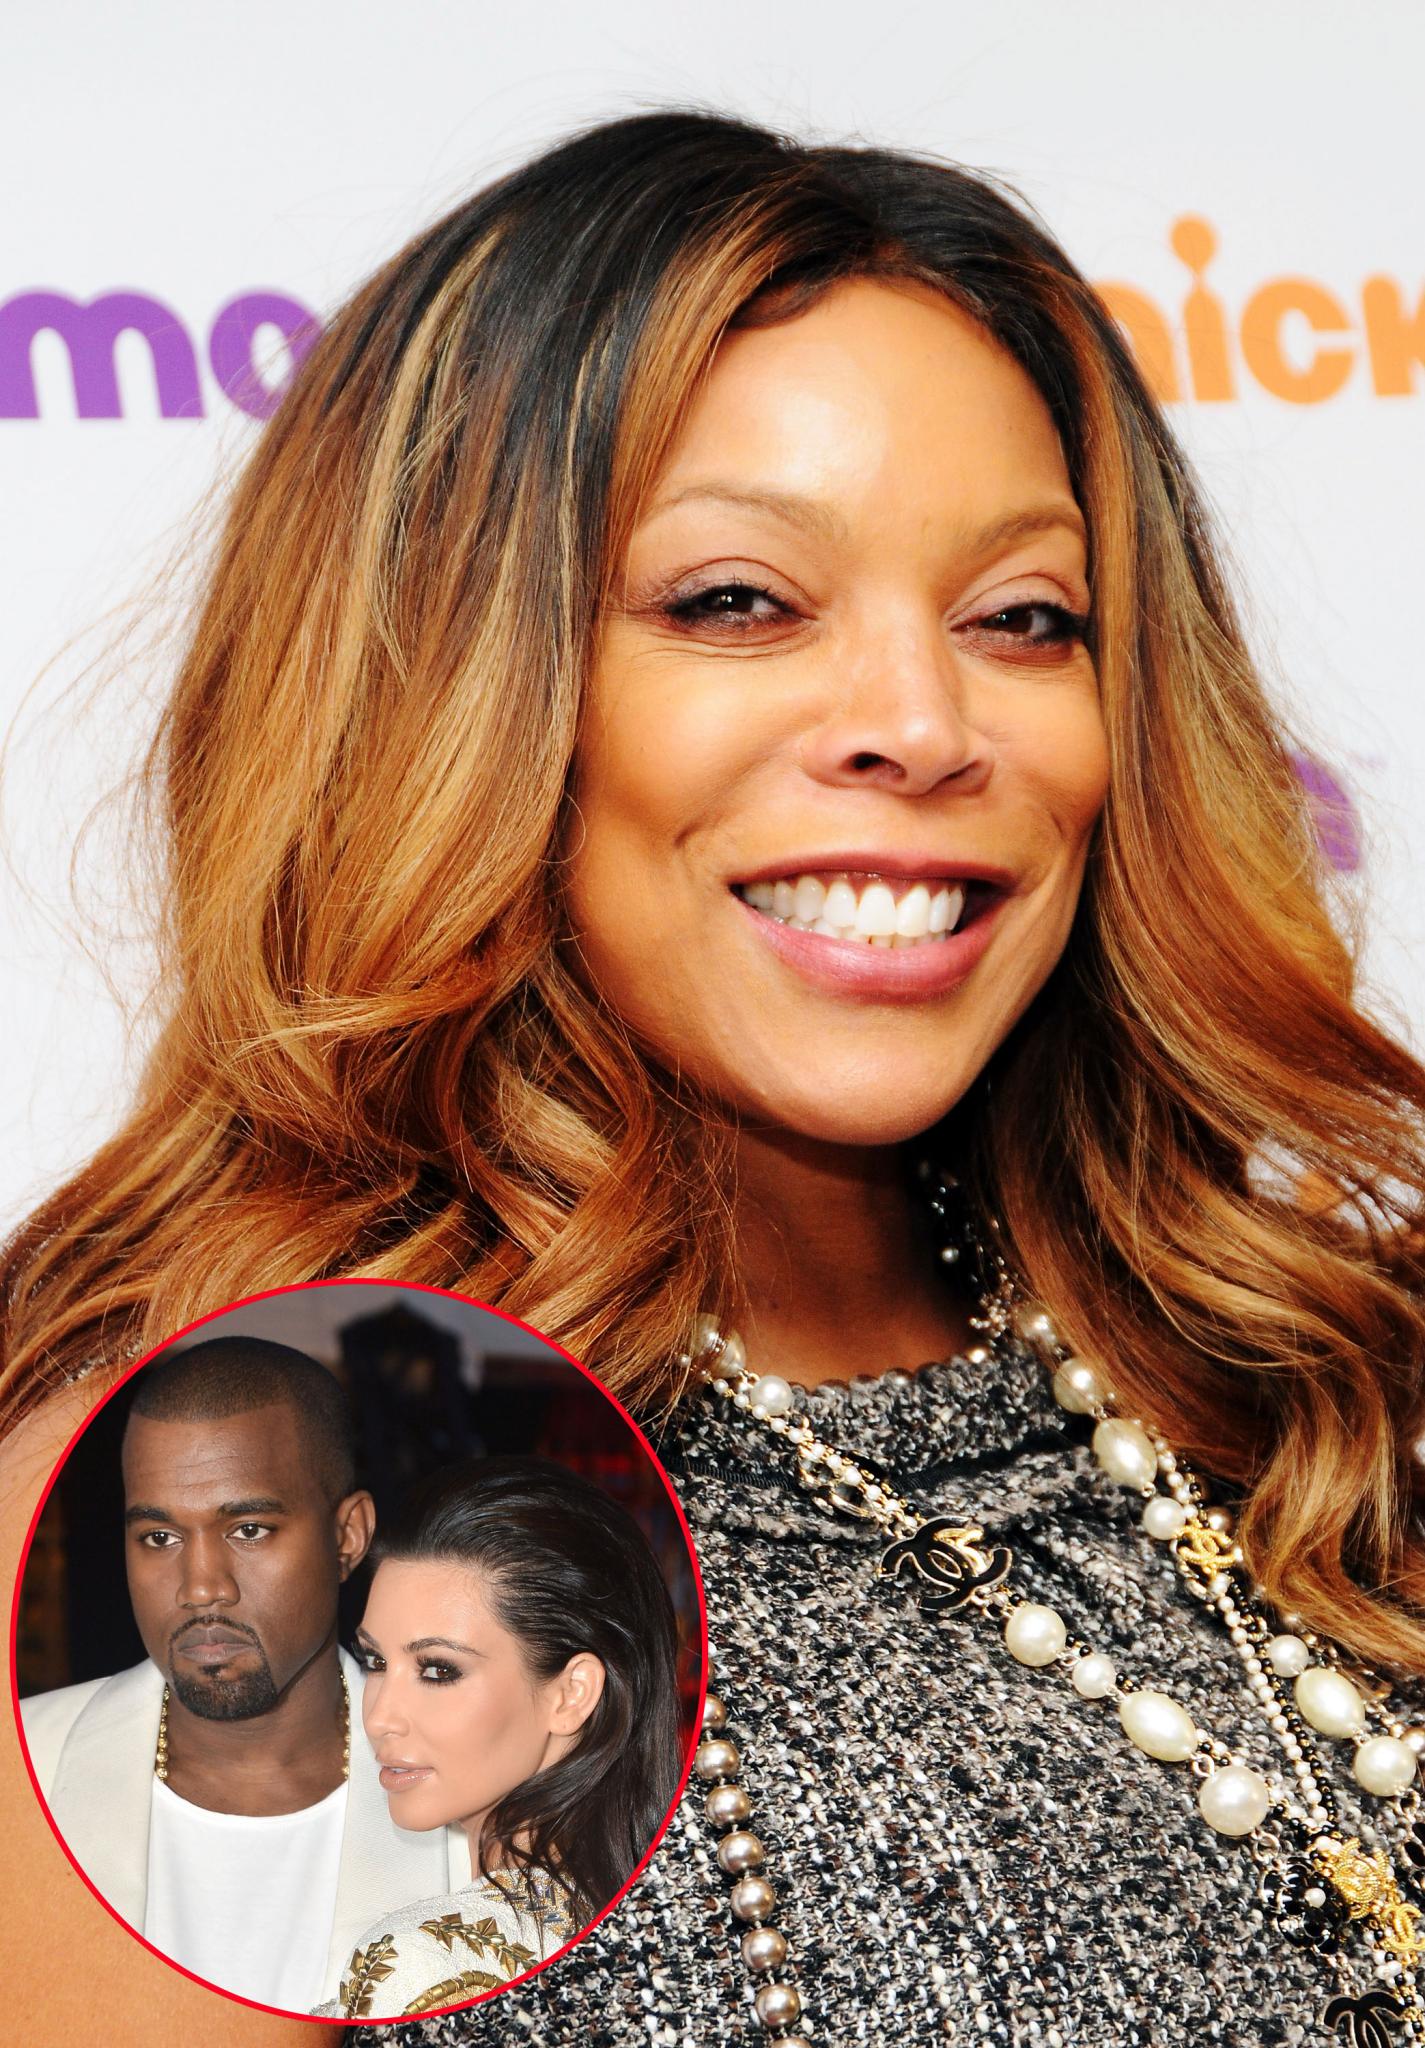 Wendy Williams to Eat Crow If Kanye Stays Married 73 Days
